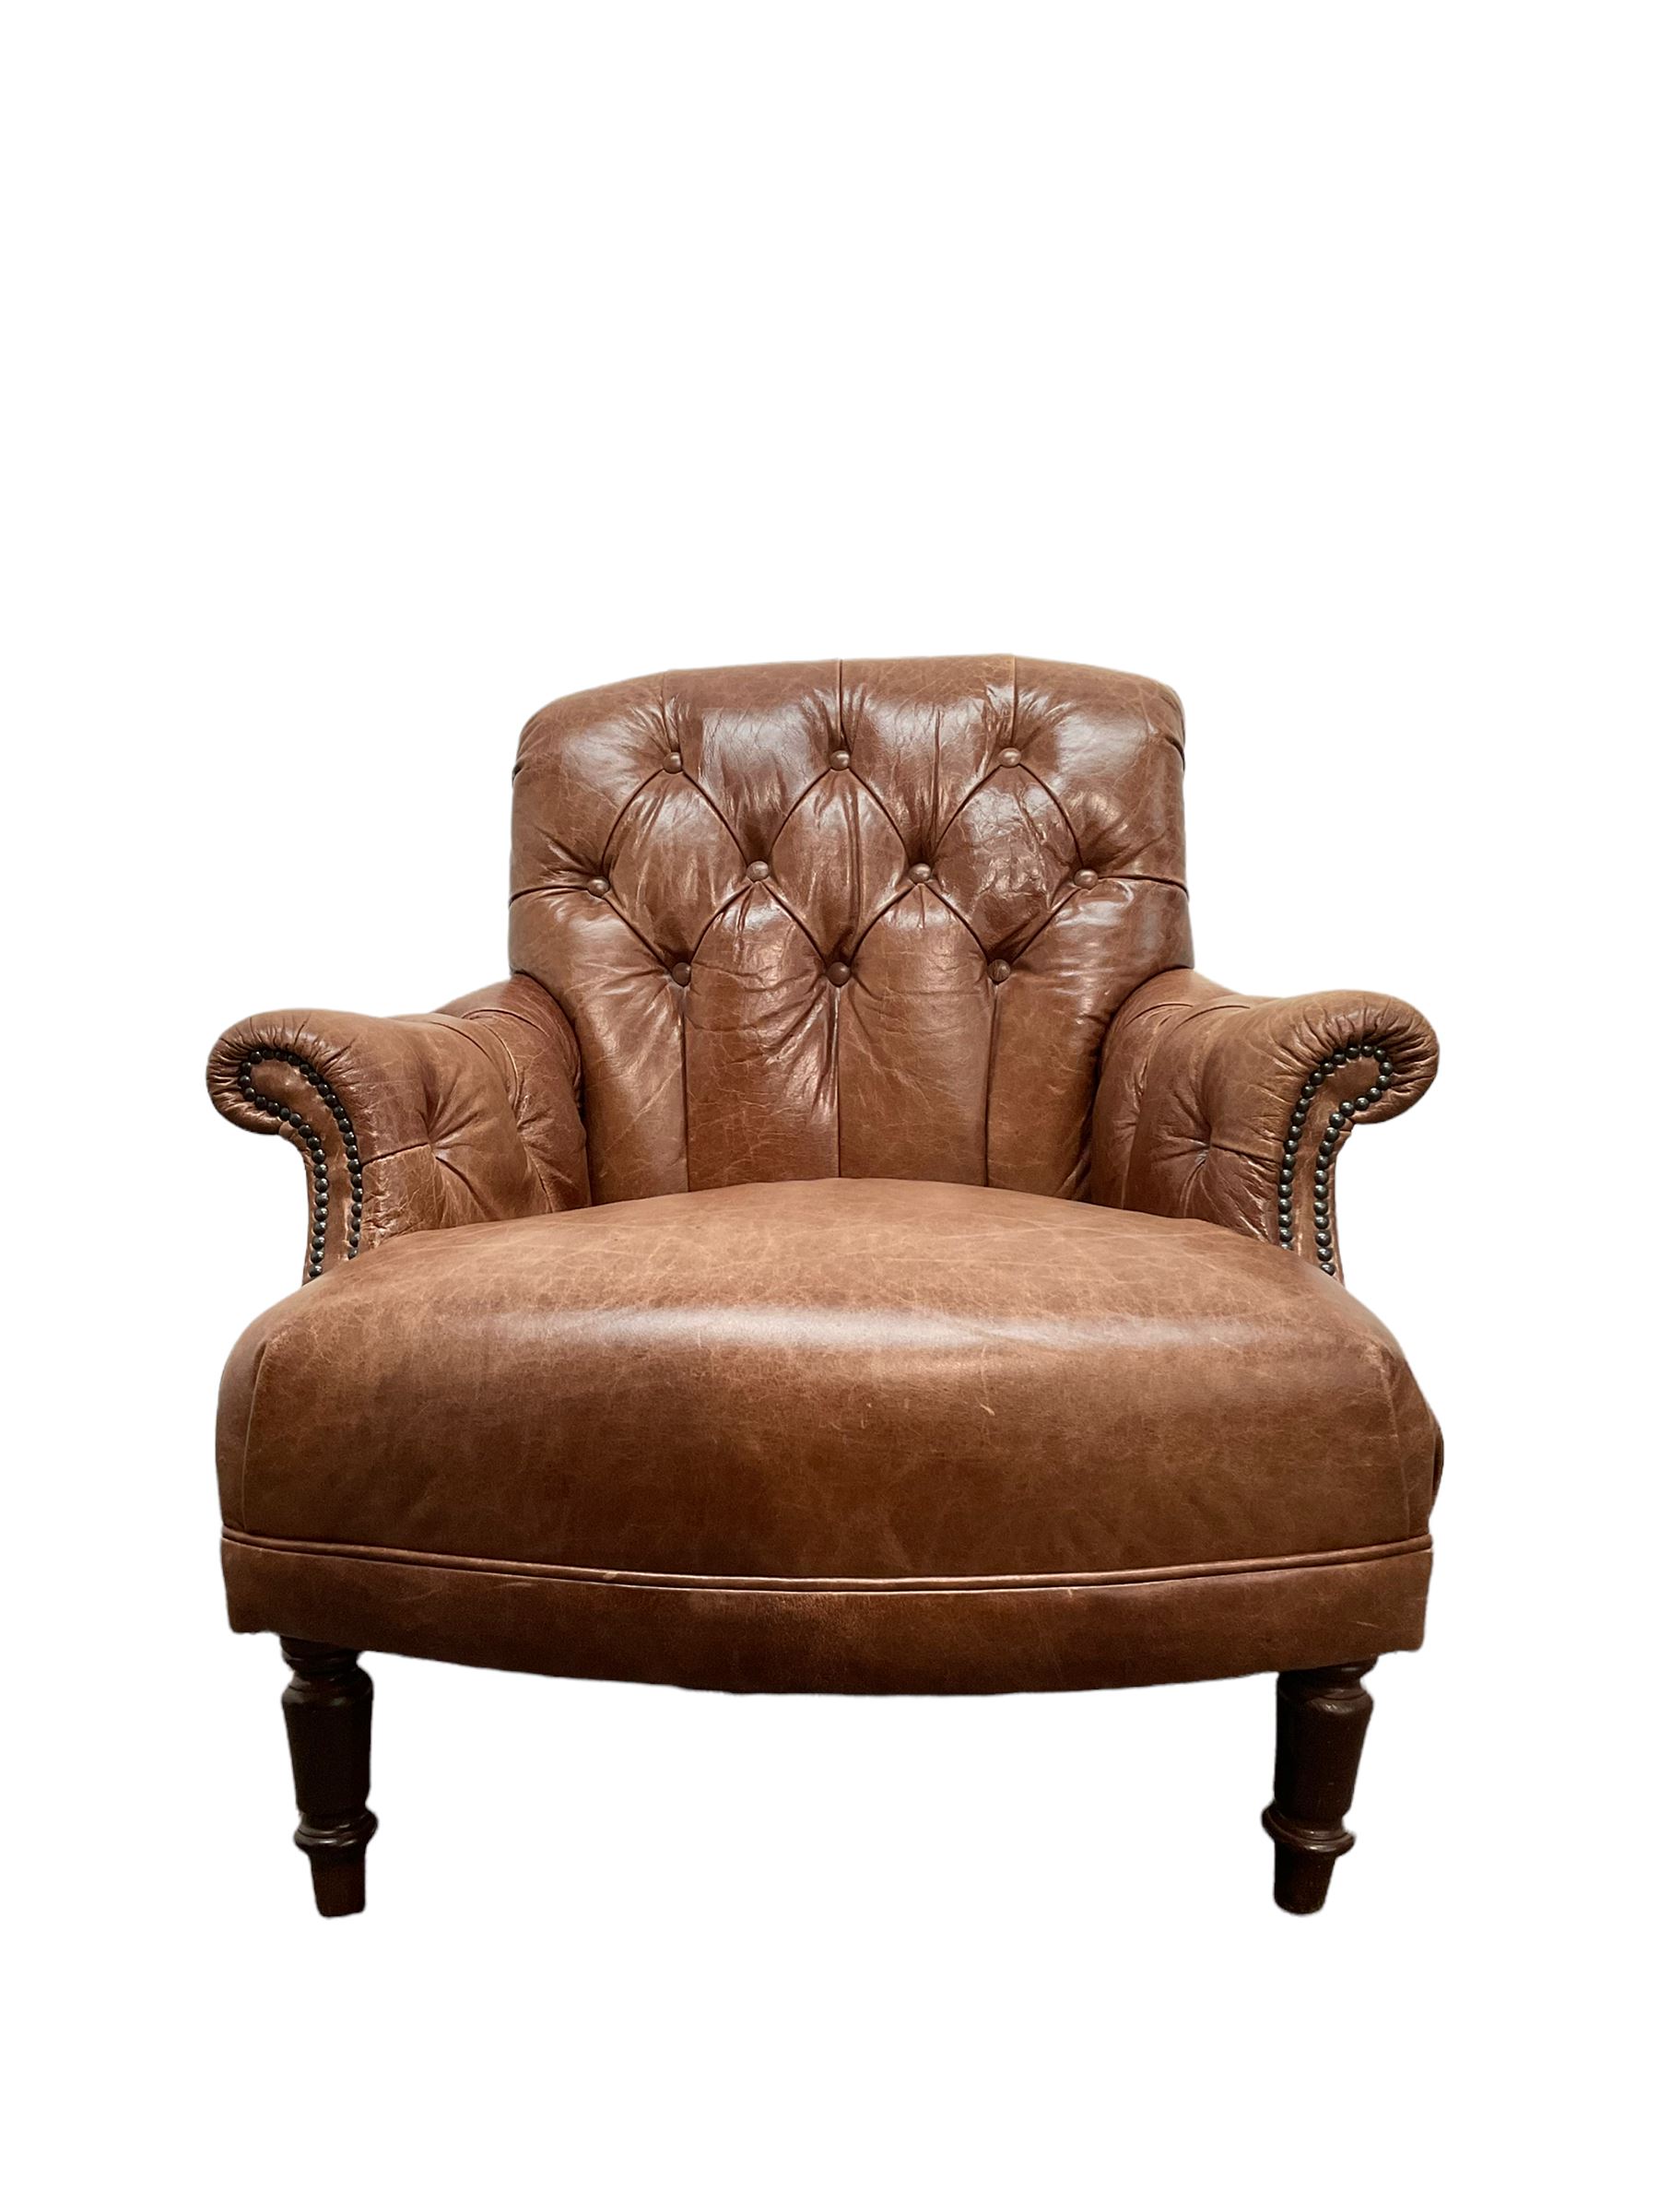 Tetrad - tub shaped armchair upholstered in buttoned tan leather - Image 3 of 3